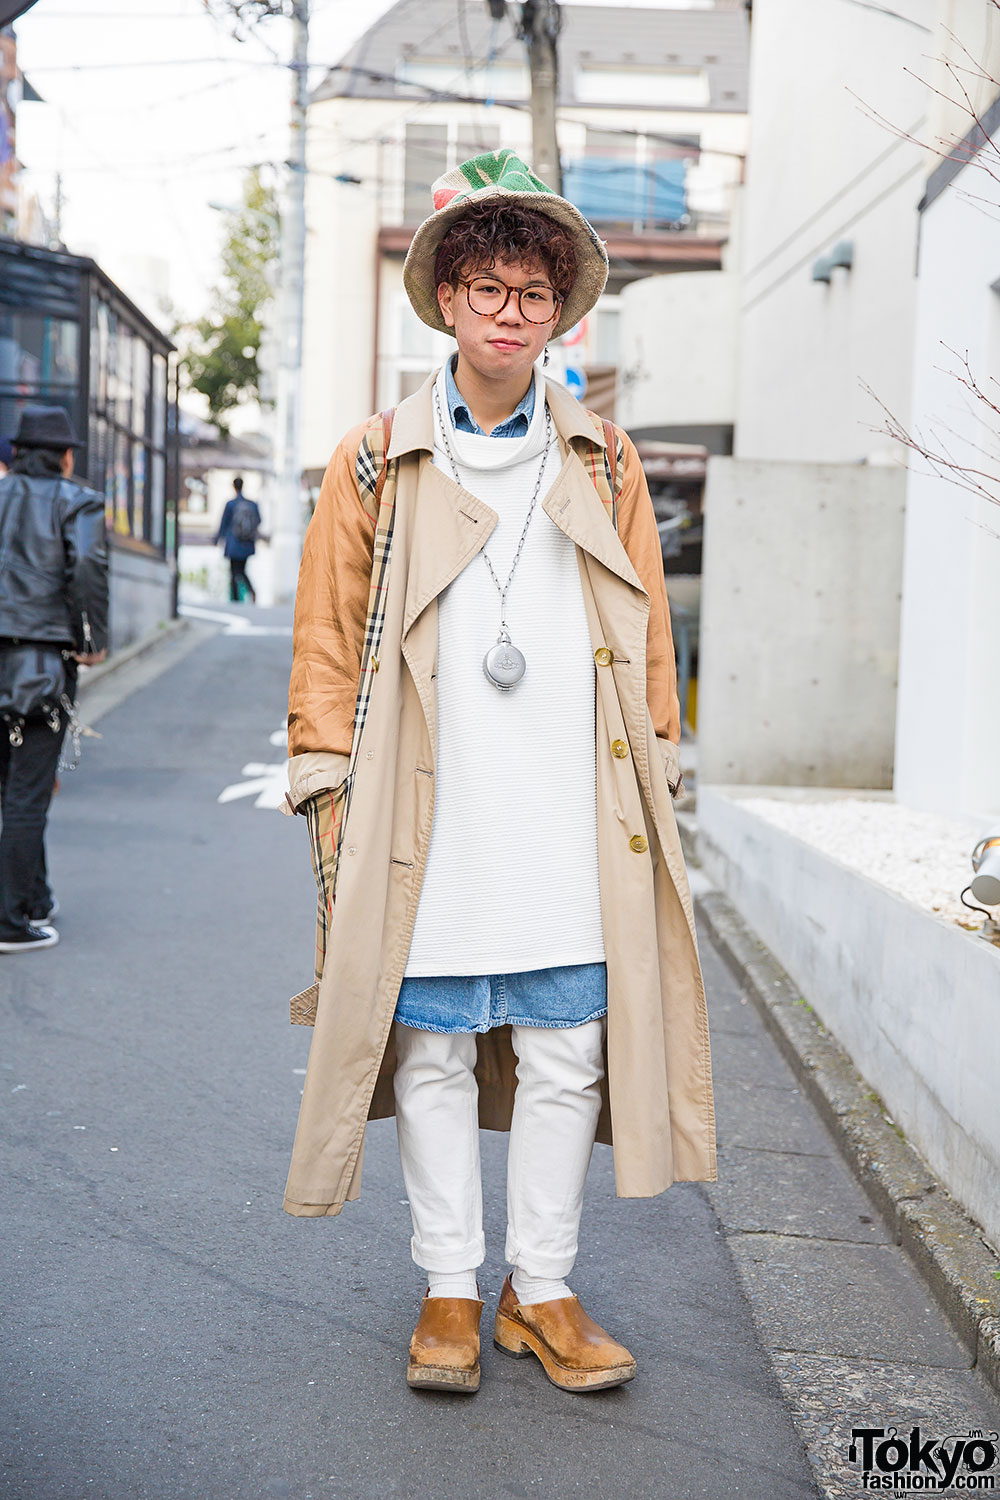 Harajuku Guy in Burberry Trench Coat, Chanel Rucksack & Clogs